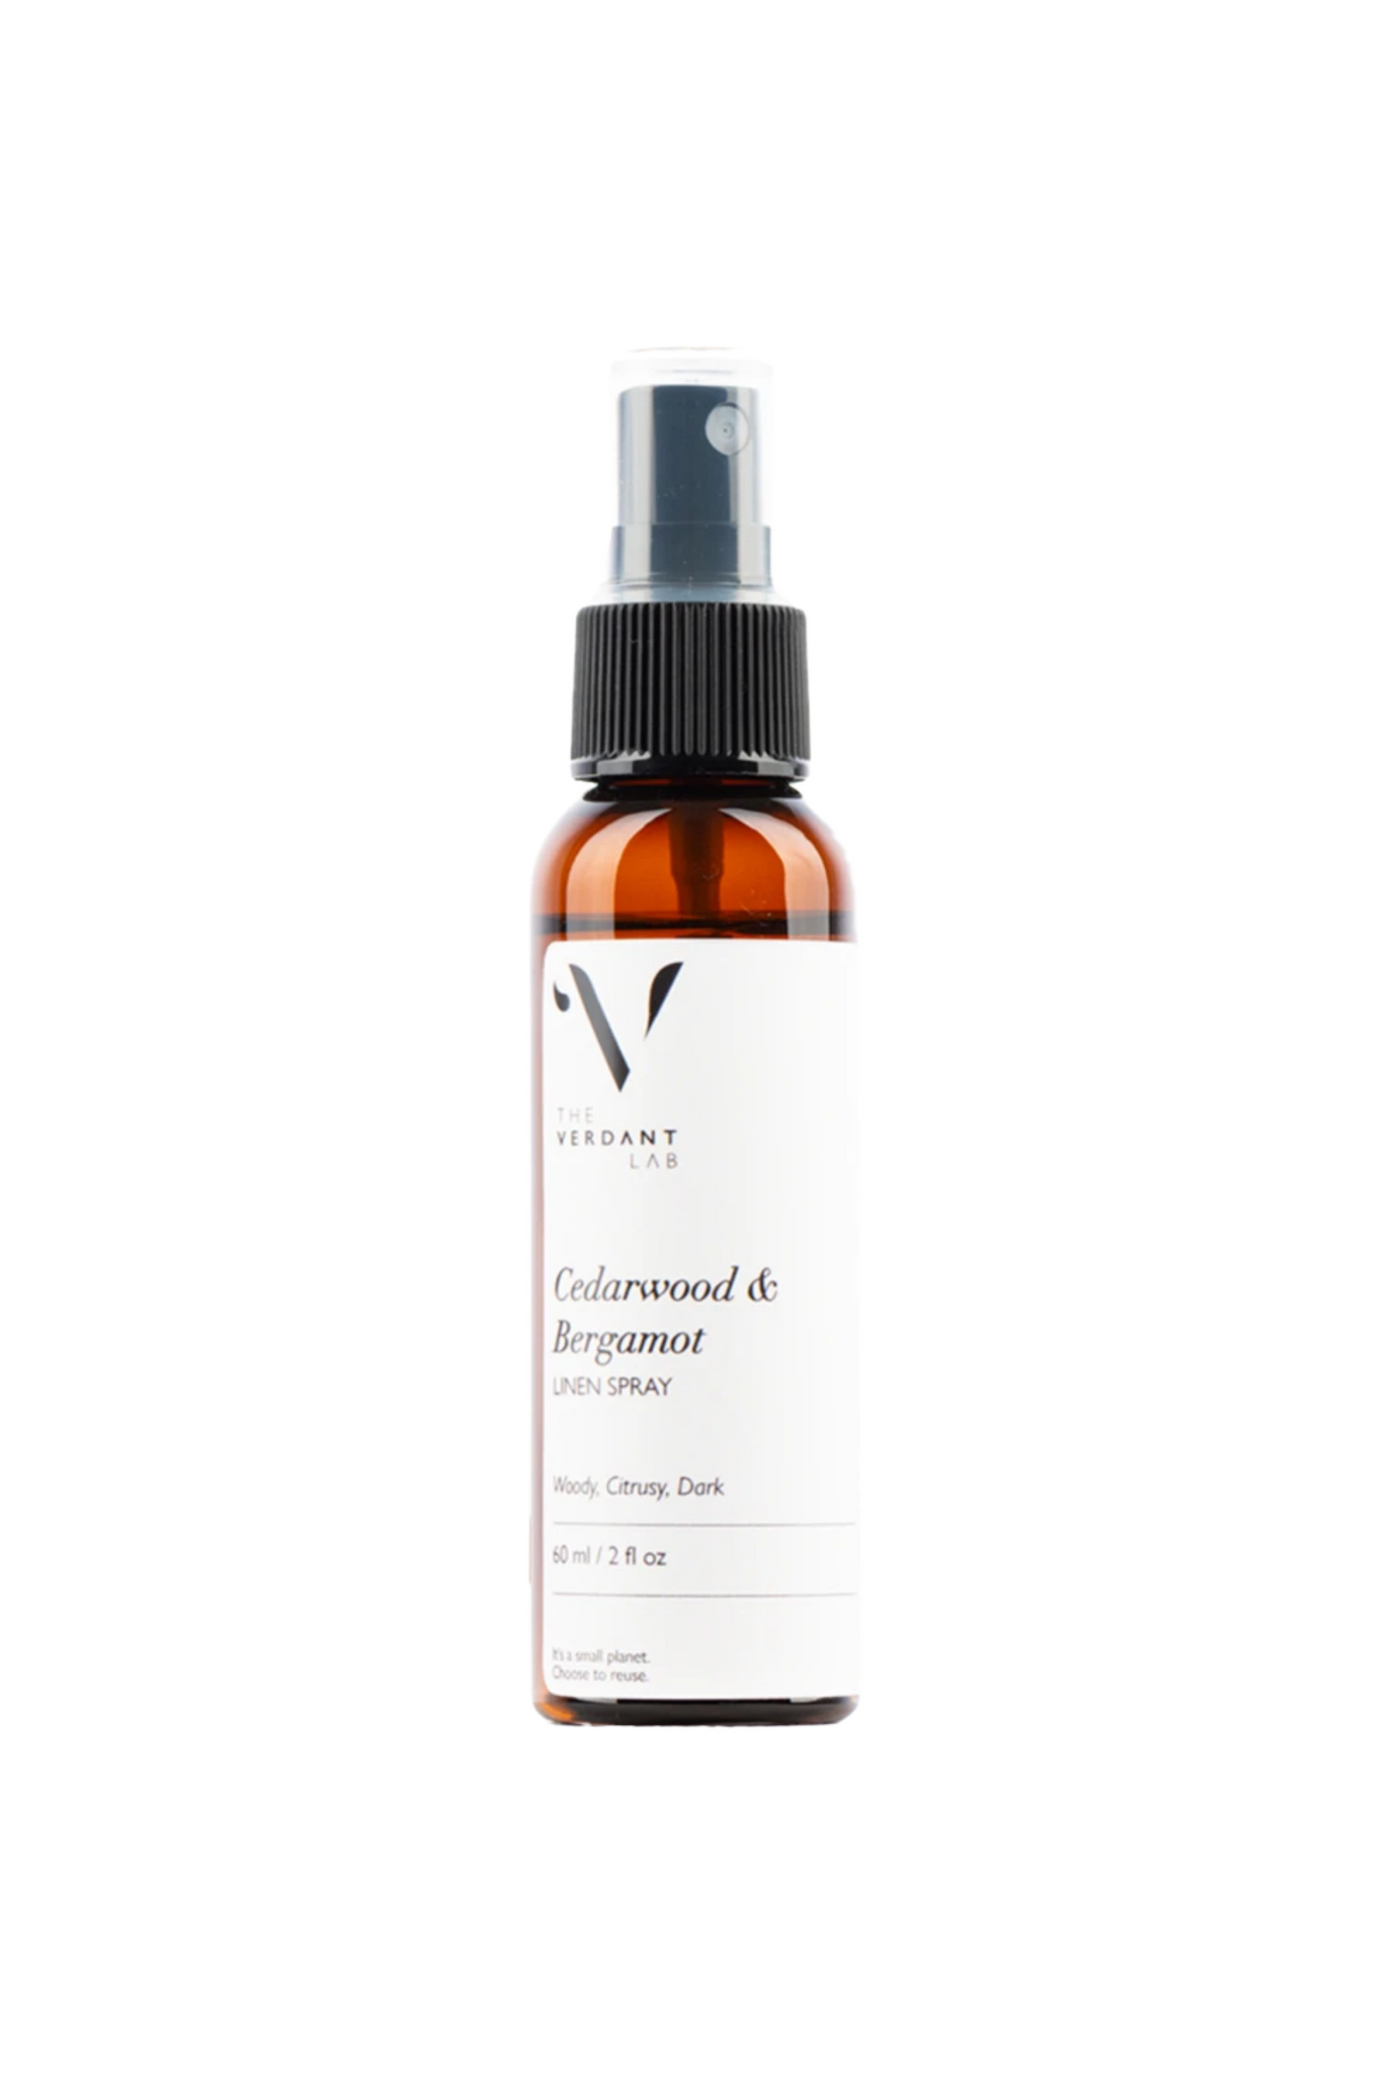 The Verdant Lab Linen Spray in Cedarwood & Bergamot, available on ZERRIN with free Singapore shipping above $50